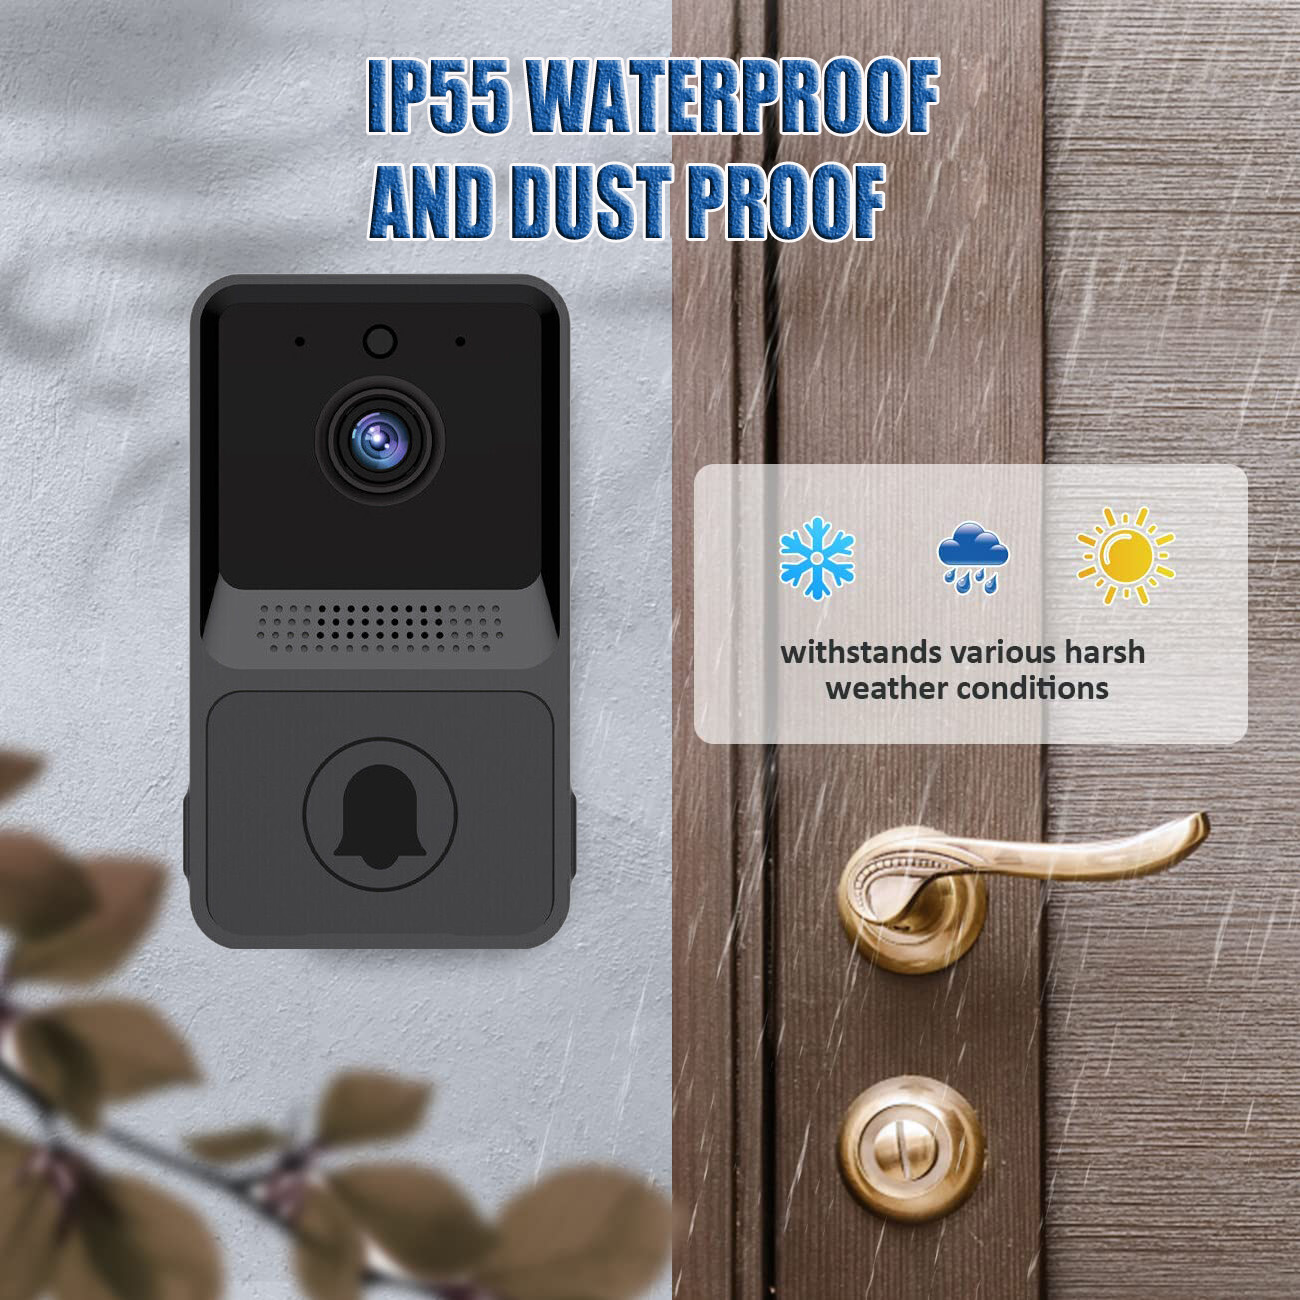 Smart-Home-Appliances-Smart-Doorbell-WIFI-Wireless-Doorbell-Video-Doorbell-With-Camera-Free-Cloud-Storage-HD-Wide-Angle-Night-Vision-2-Way-Talk-Chime-for-Home-Office-71